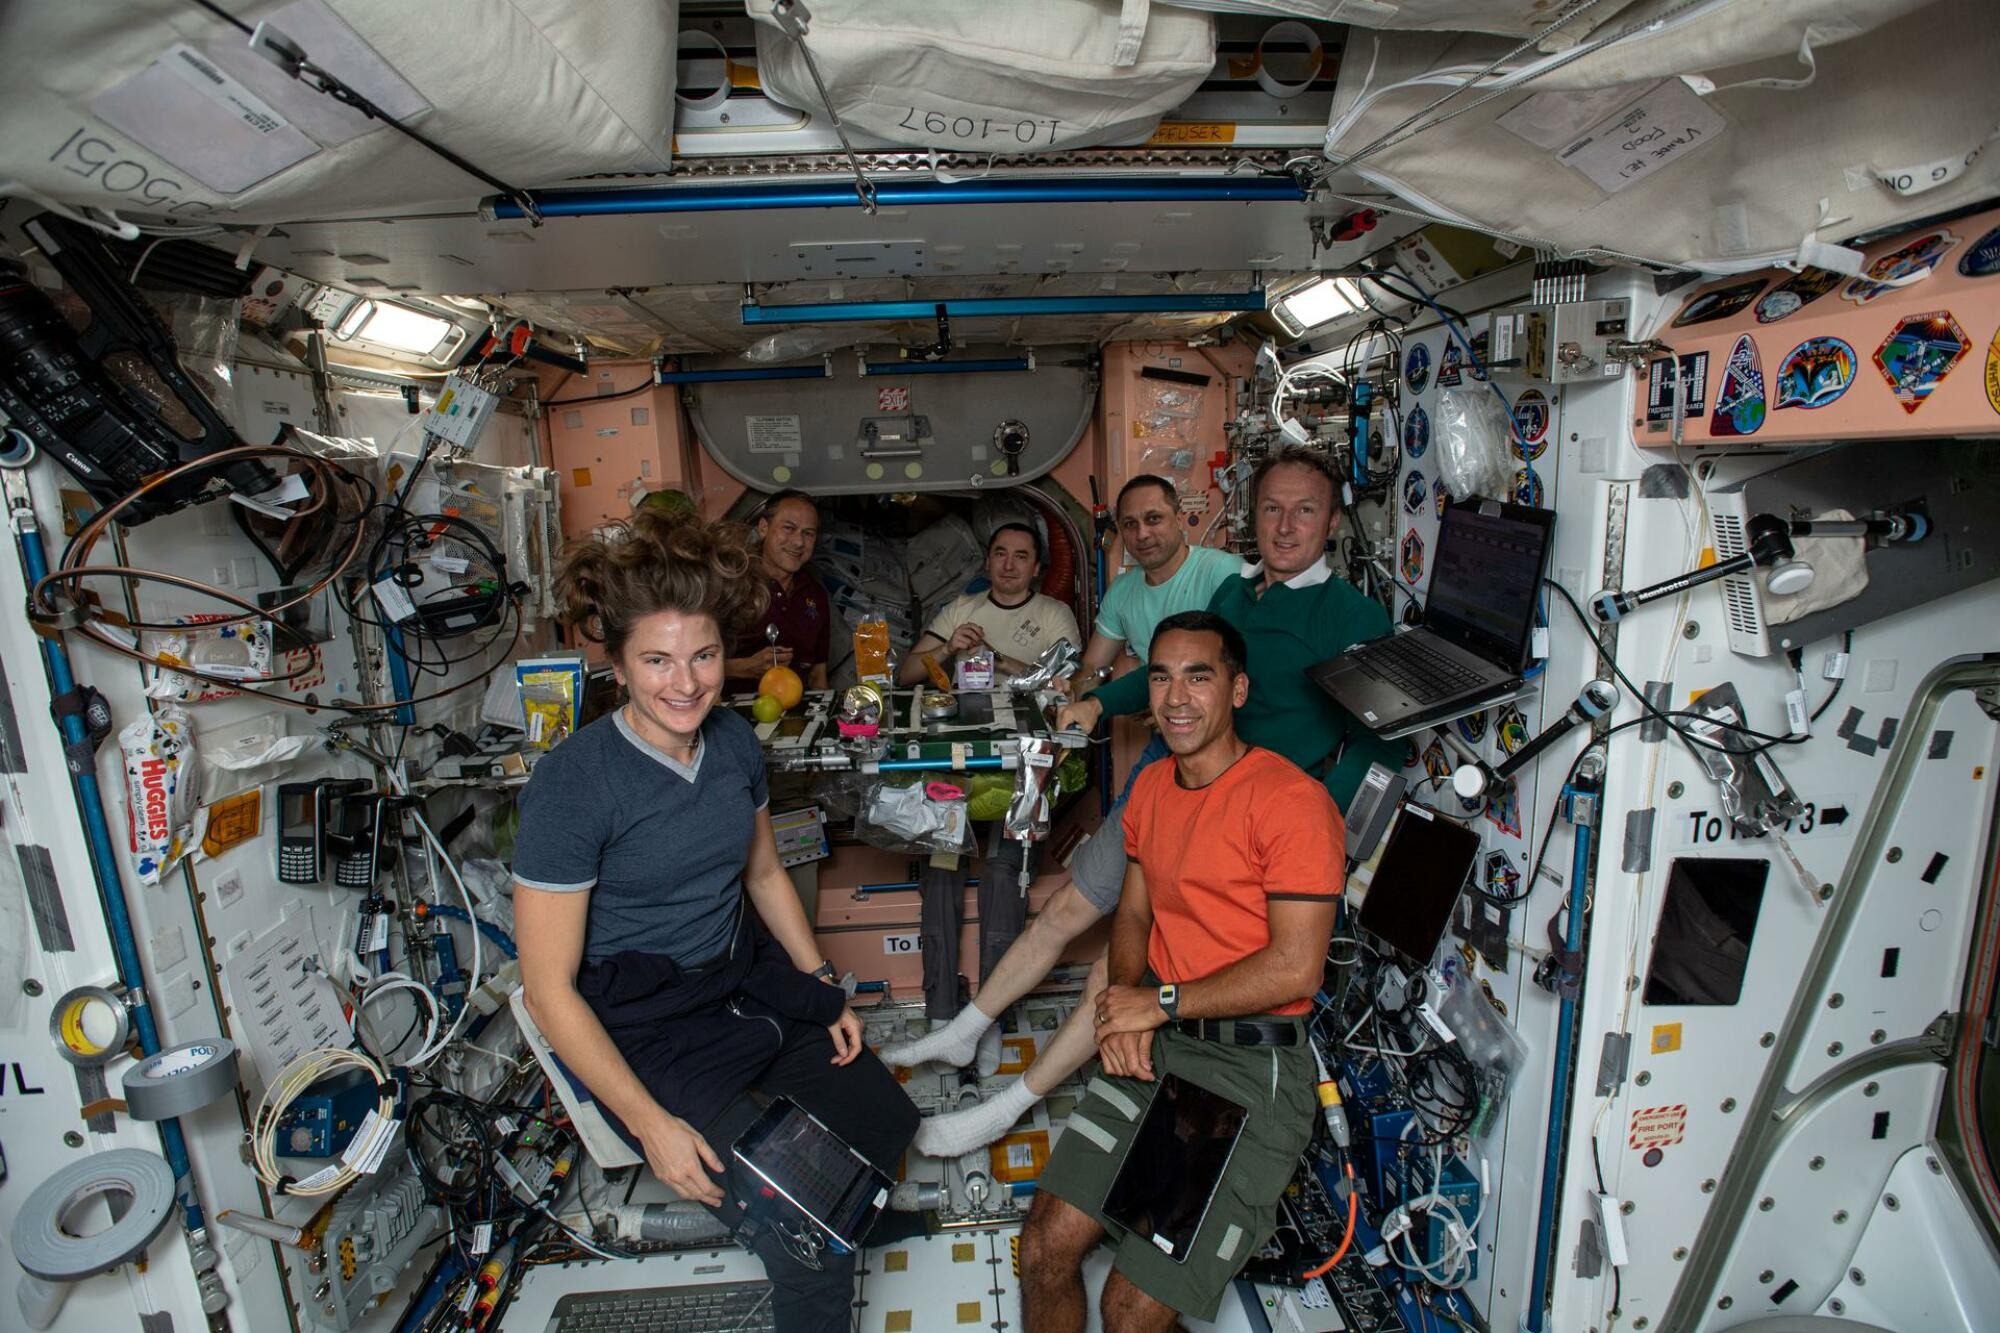 Exotic fruits and freeze-dried turkey: The ISS crew was treated to Thanksgiving with culinary masterpieces